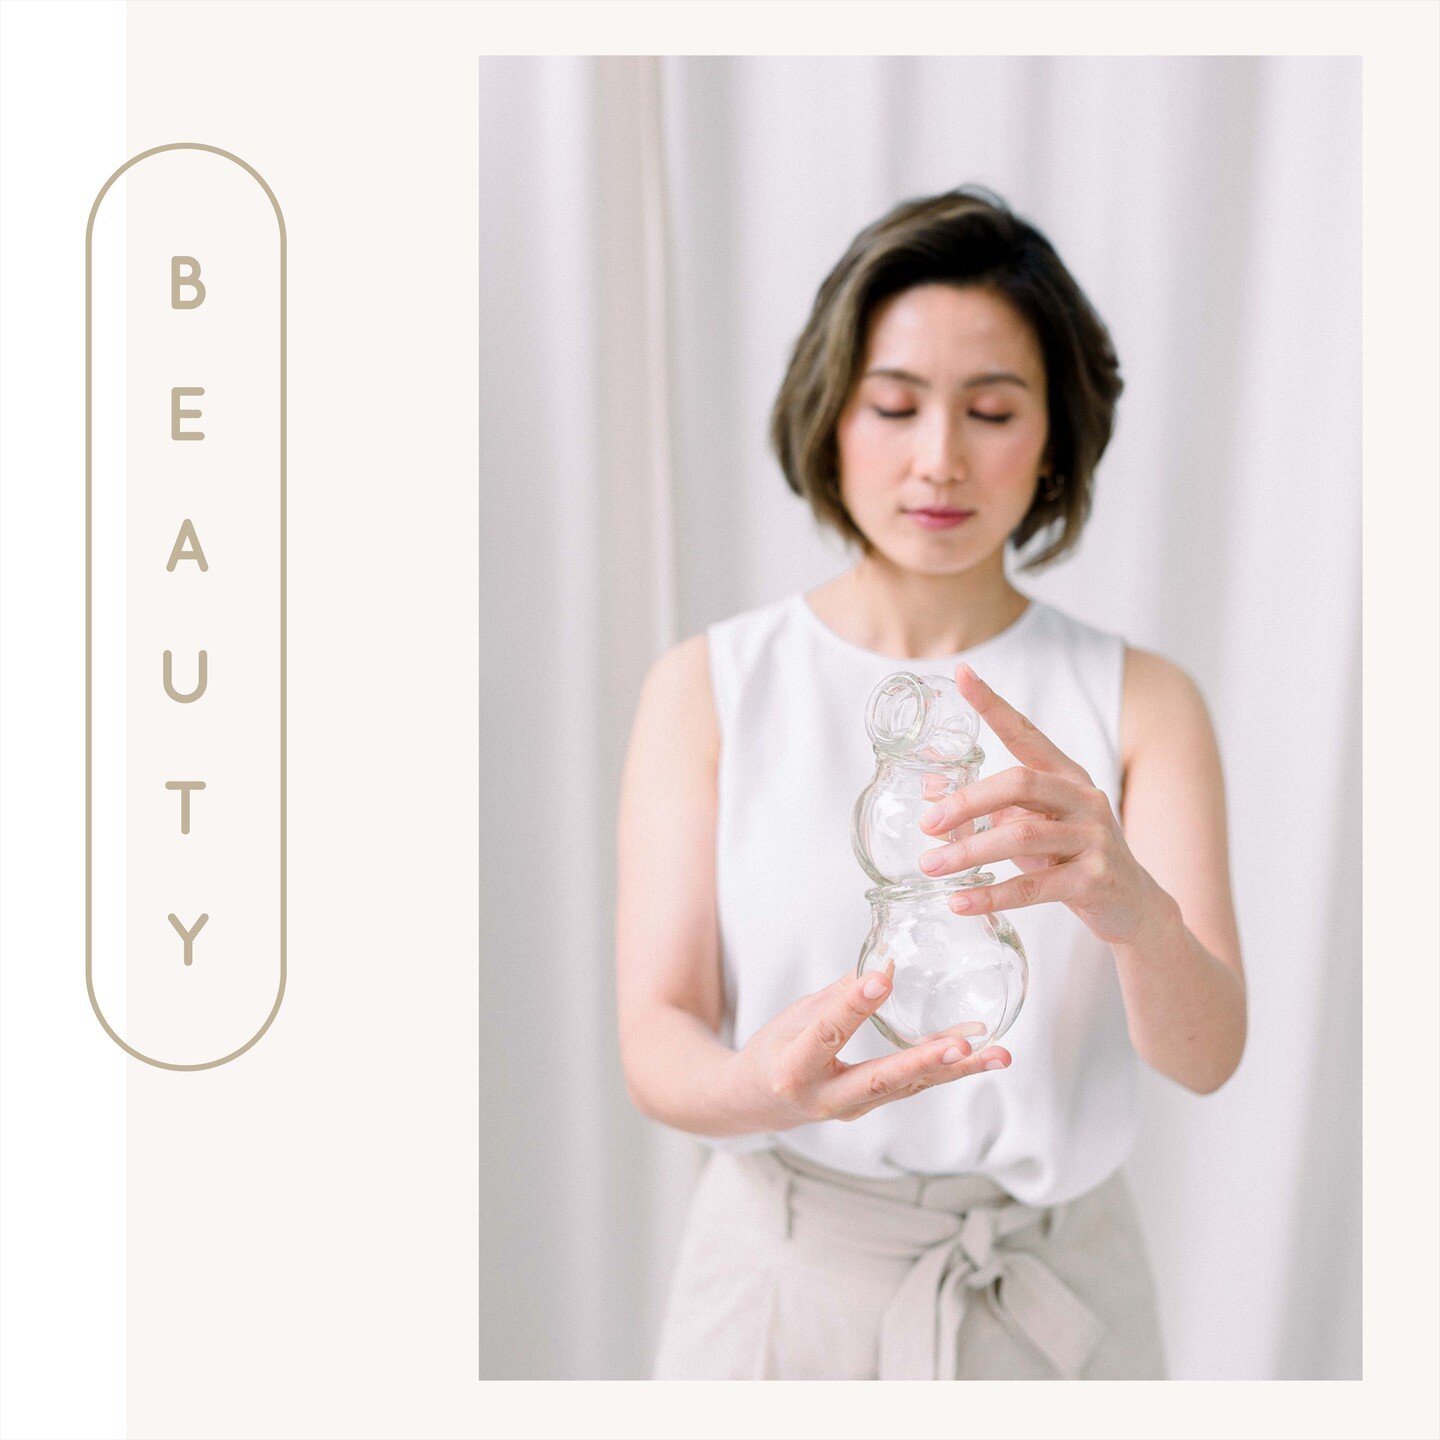 BEAUTY service with your acupuncturist ~
As a Chinese Medicine practitioner, I want to share my idea of aging and beauty though my service. I want to seek out and inhabit a middle ground between the modern term of beauty and the philosophy from Chine